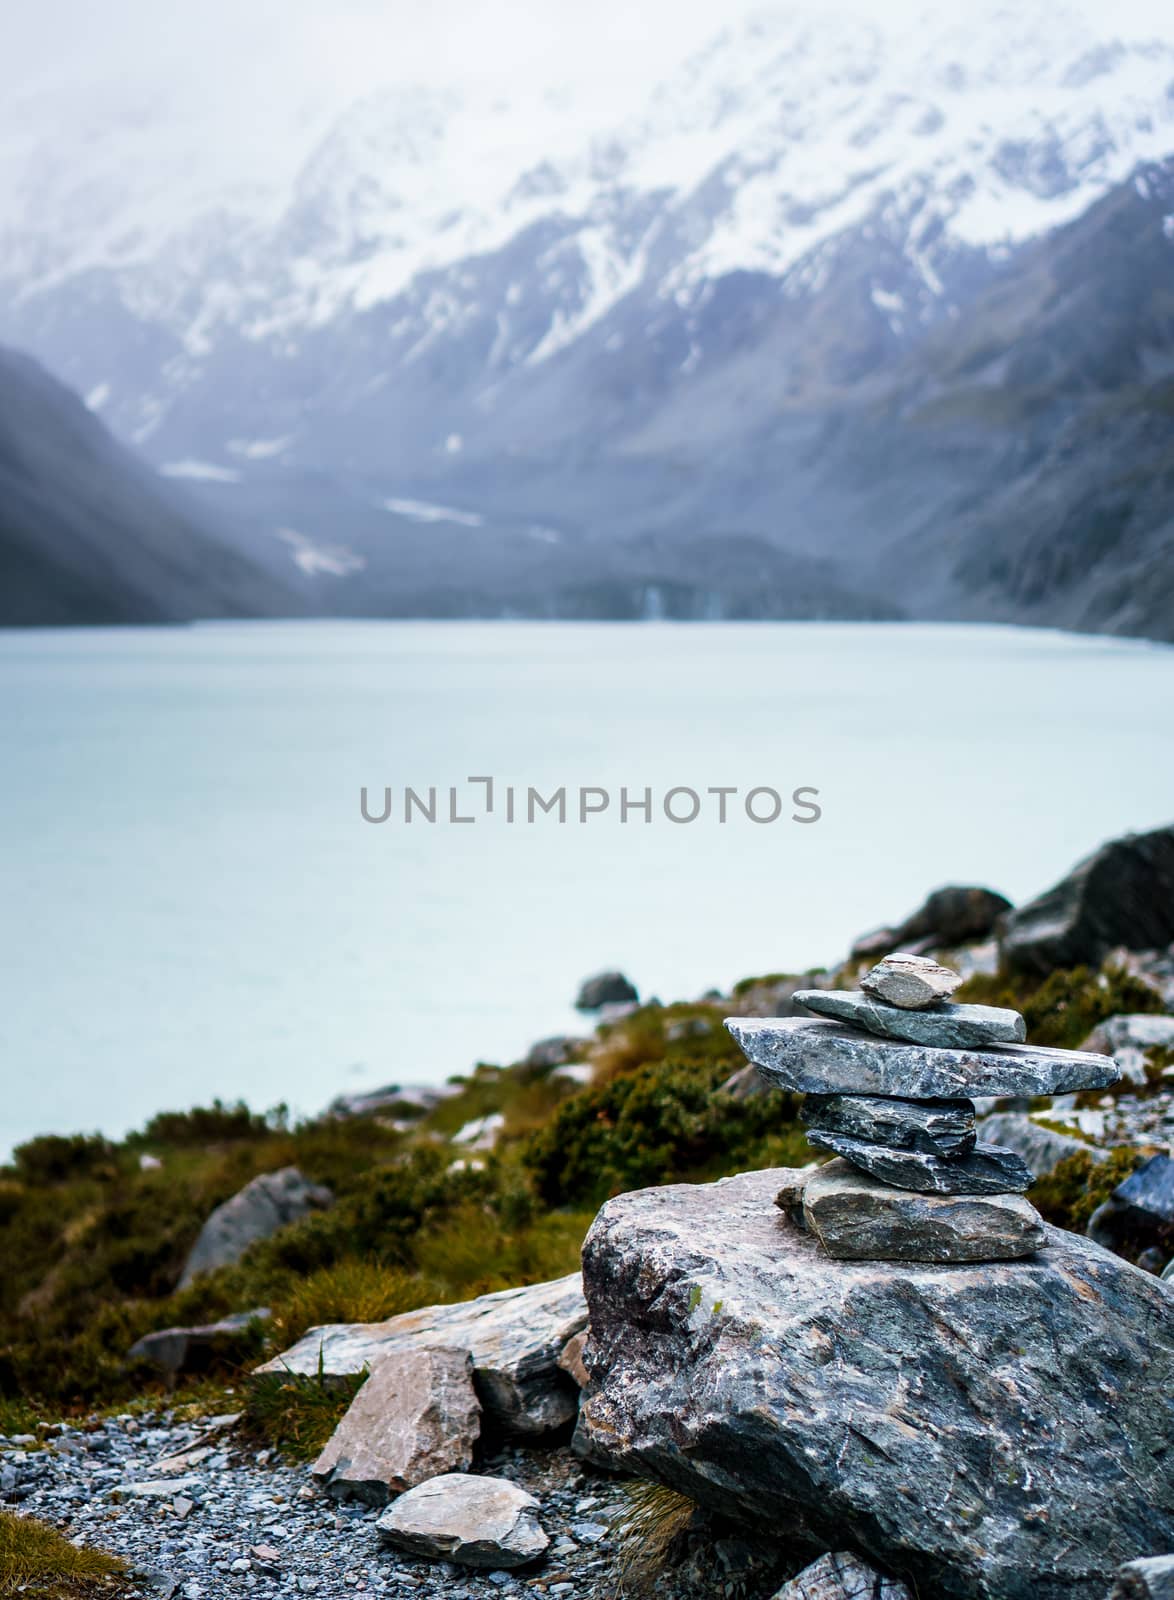 Rocks piled in a cairn in front of hooker lake in New Zealand. Tranquil scene with mountains in the background.